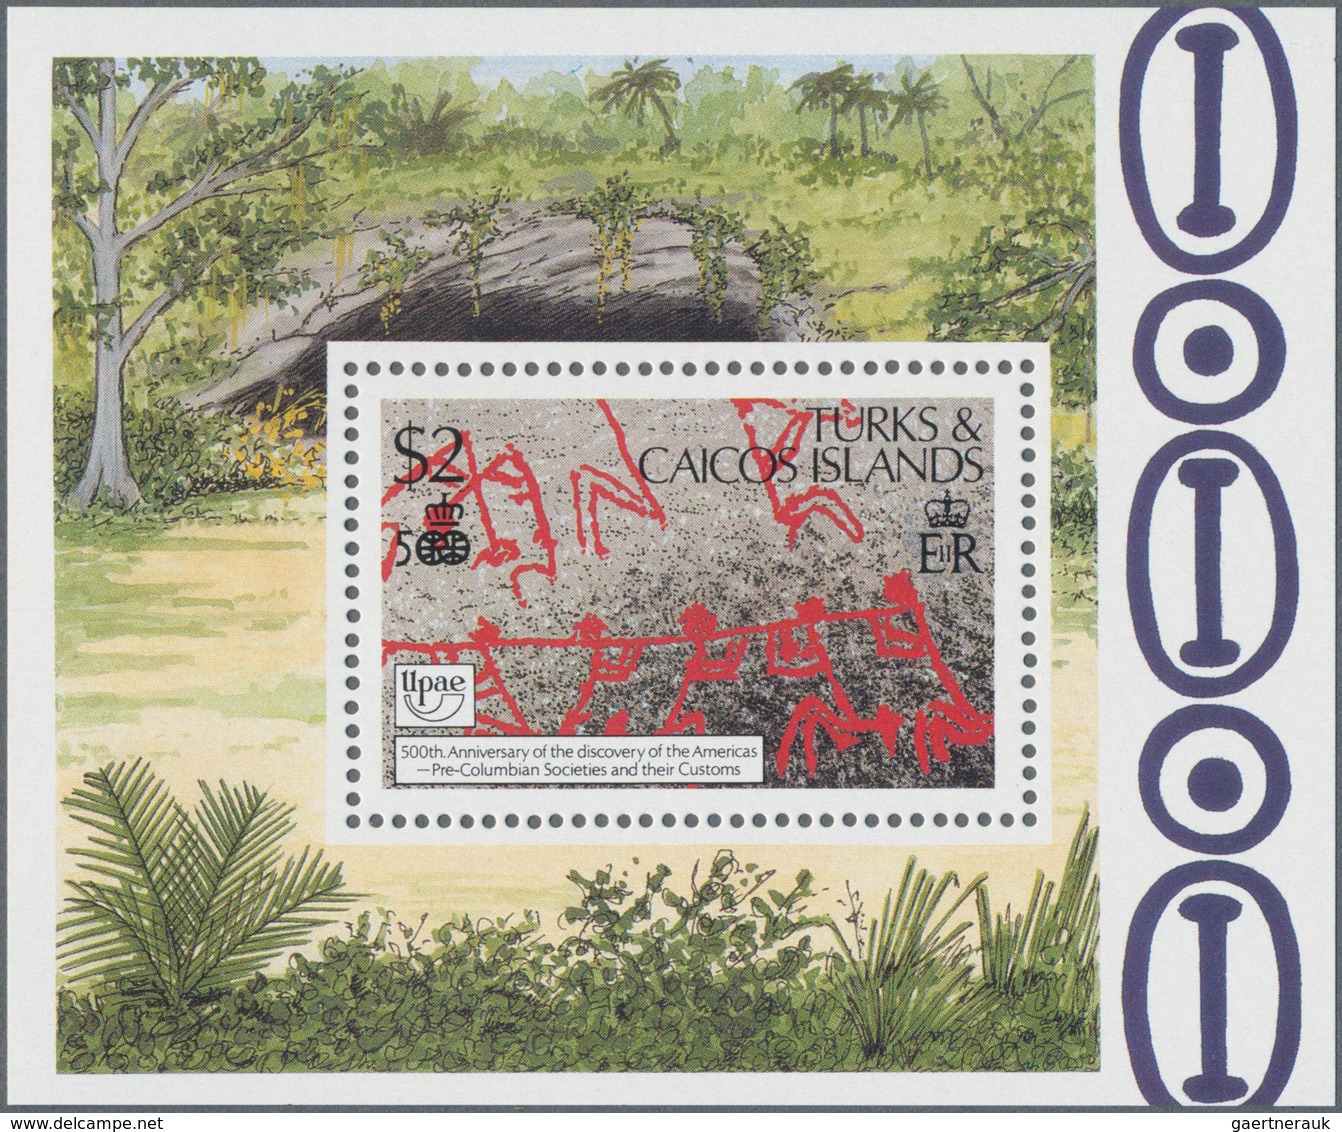 Karibik: 1989/1996, very unusual accumulation of the joint issues ‚America (UPAE)‘ from Antigua&Barb